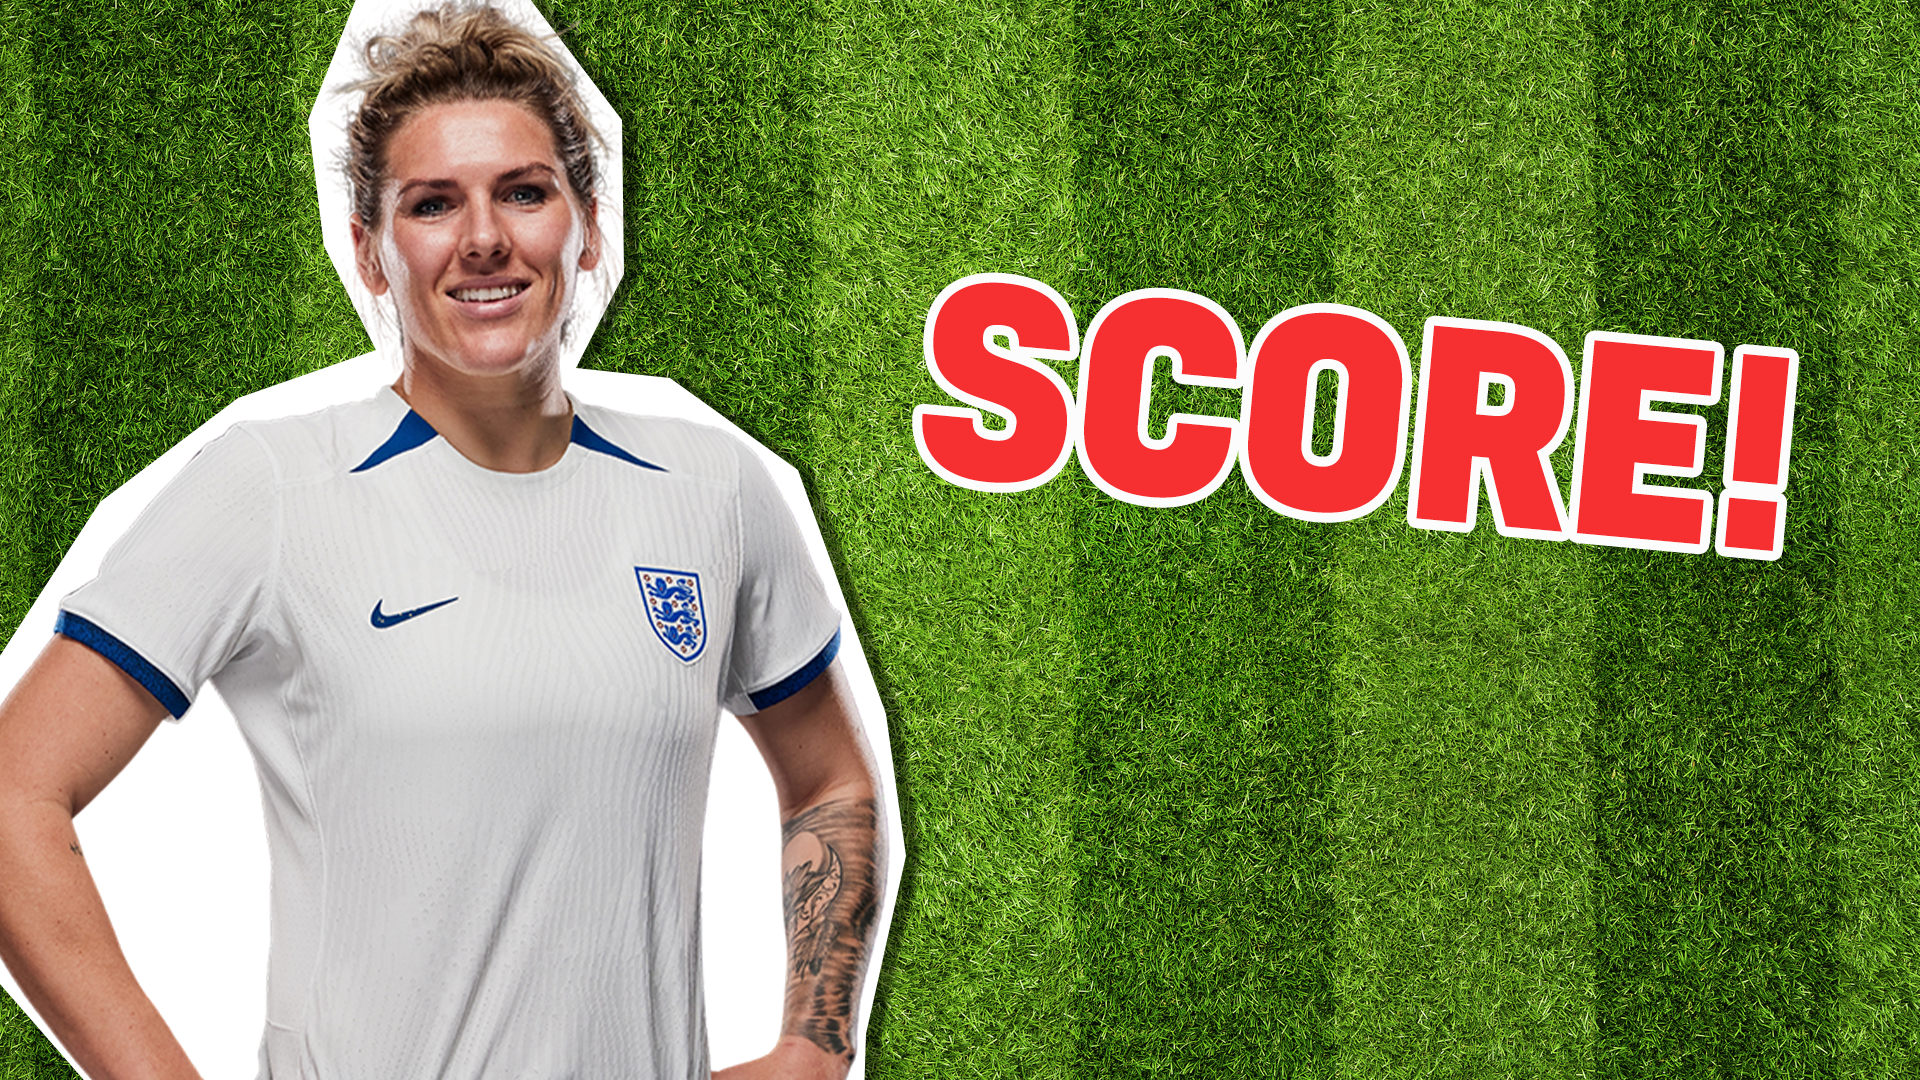 Score! You got 100% right on this Millie Bright quiz! Congrats! Millie would be proud!